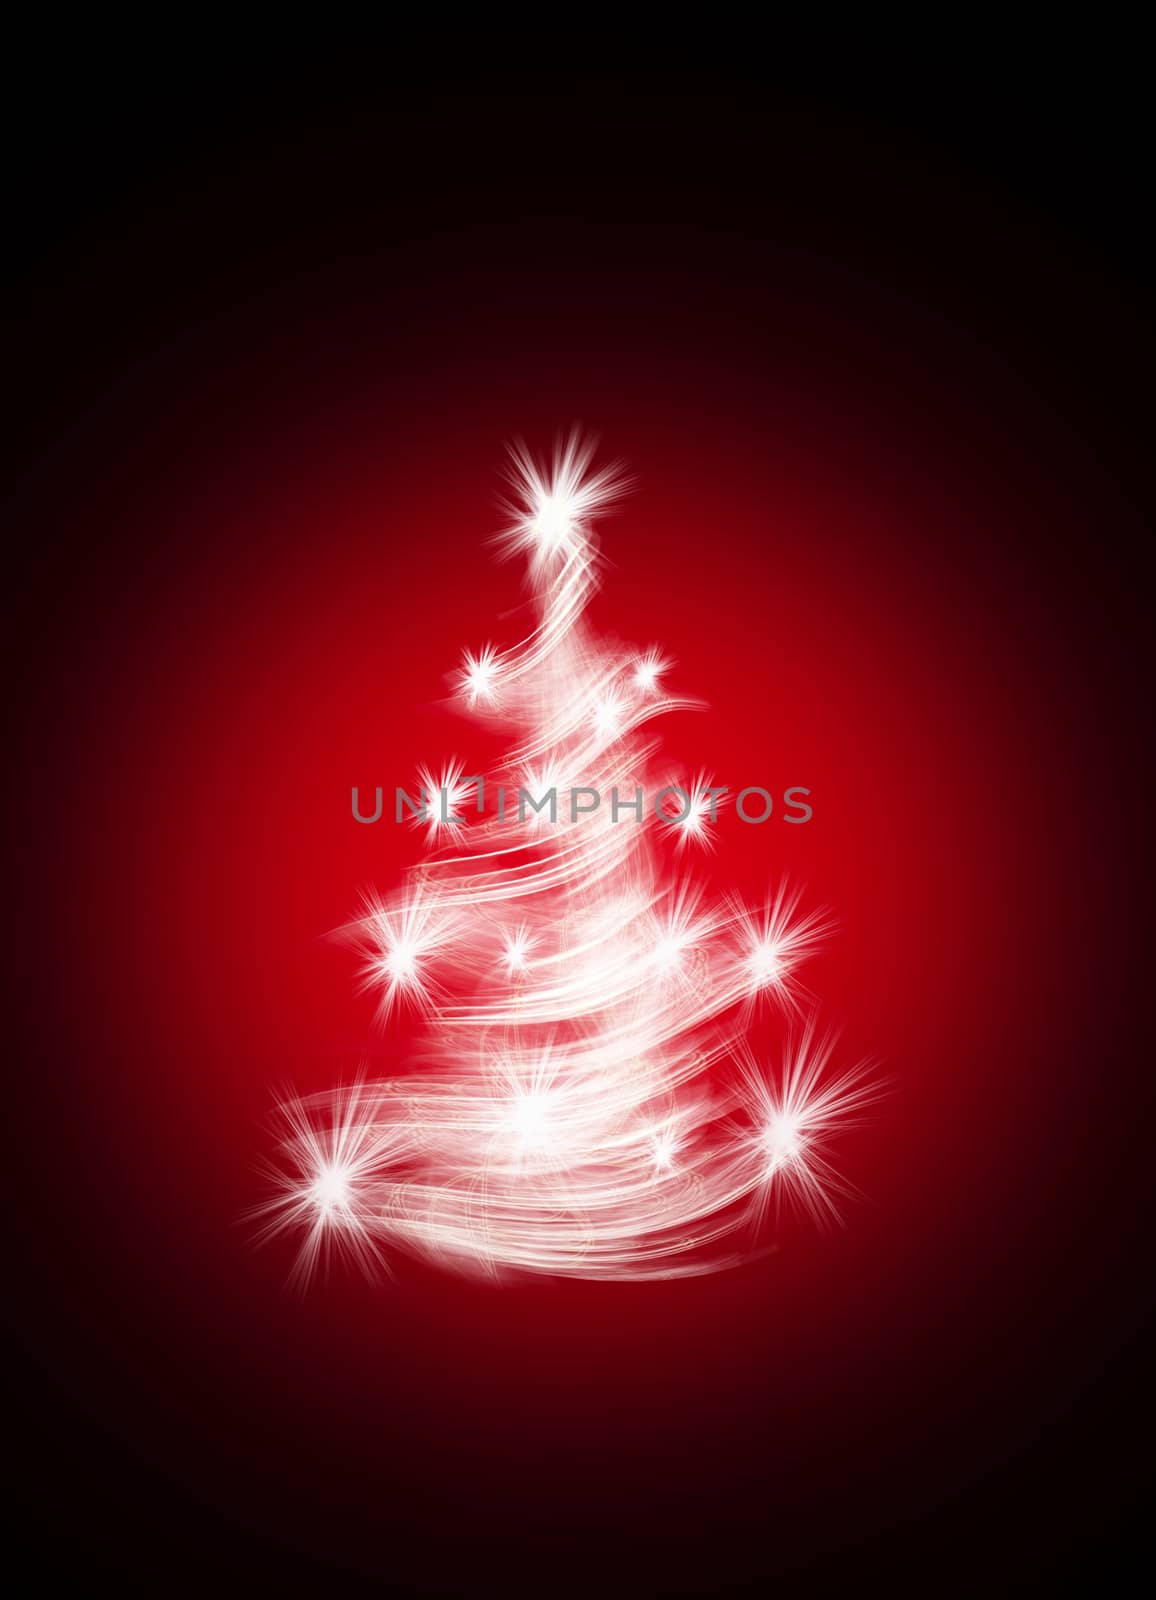 christmas tree on red background with stars